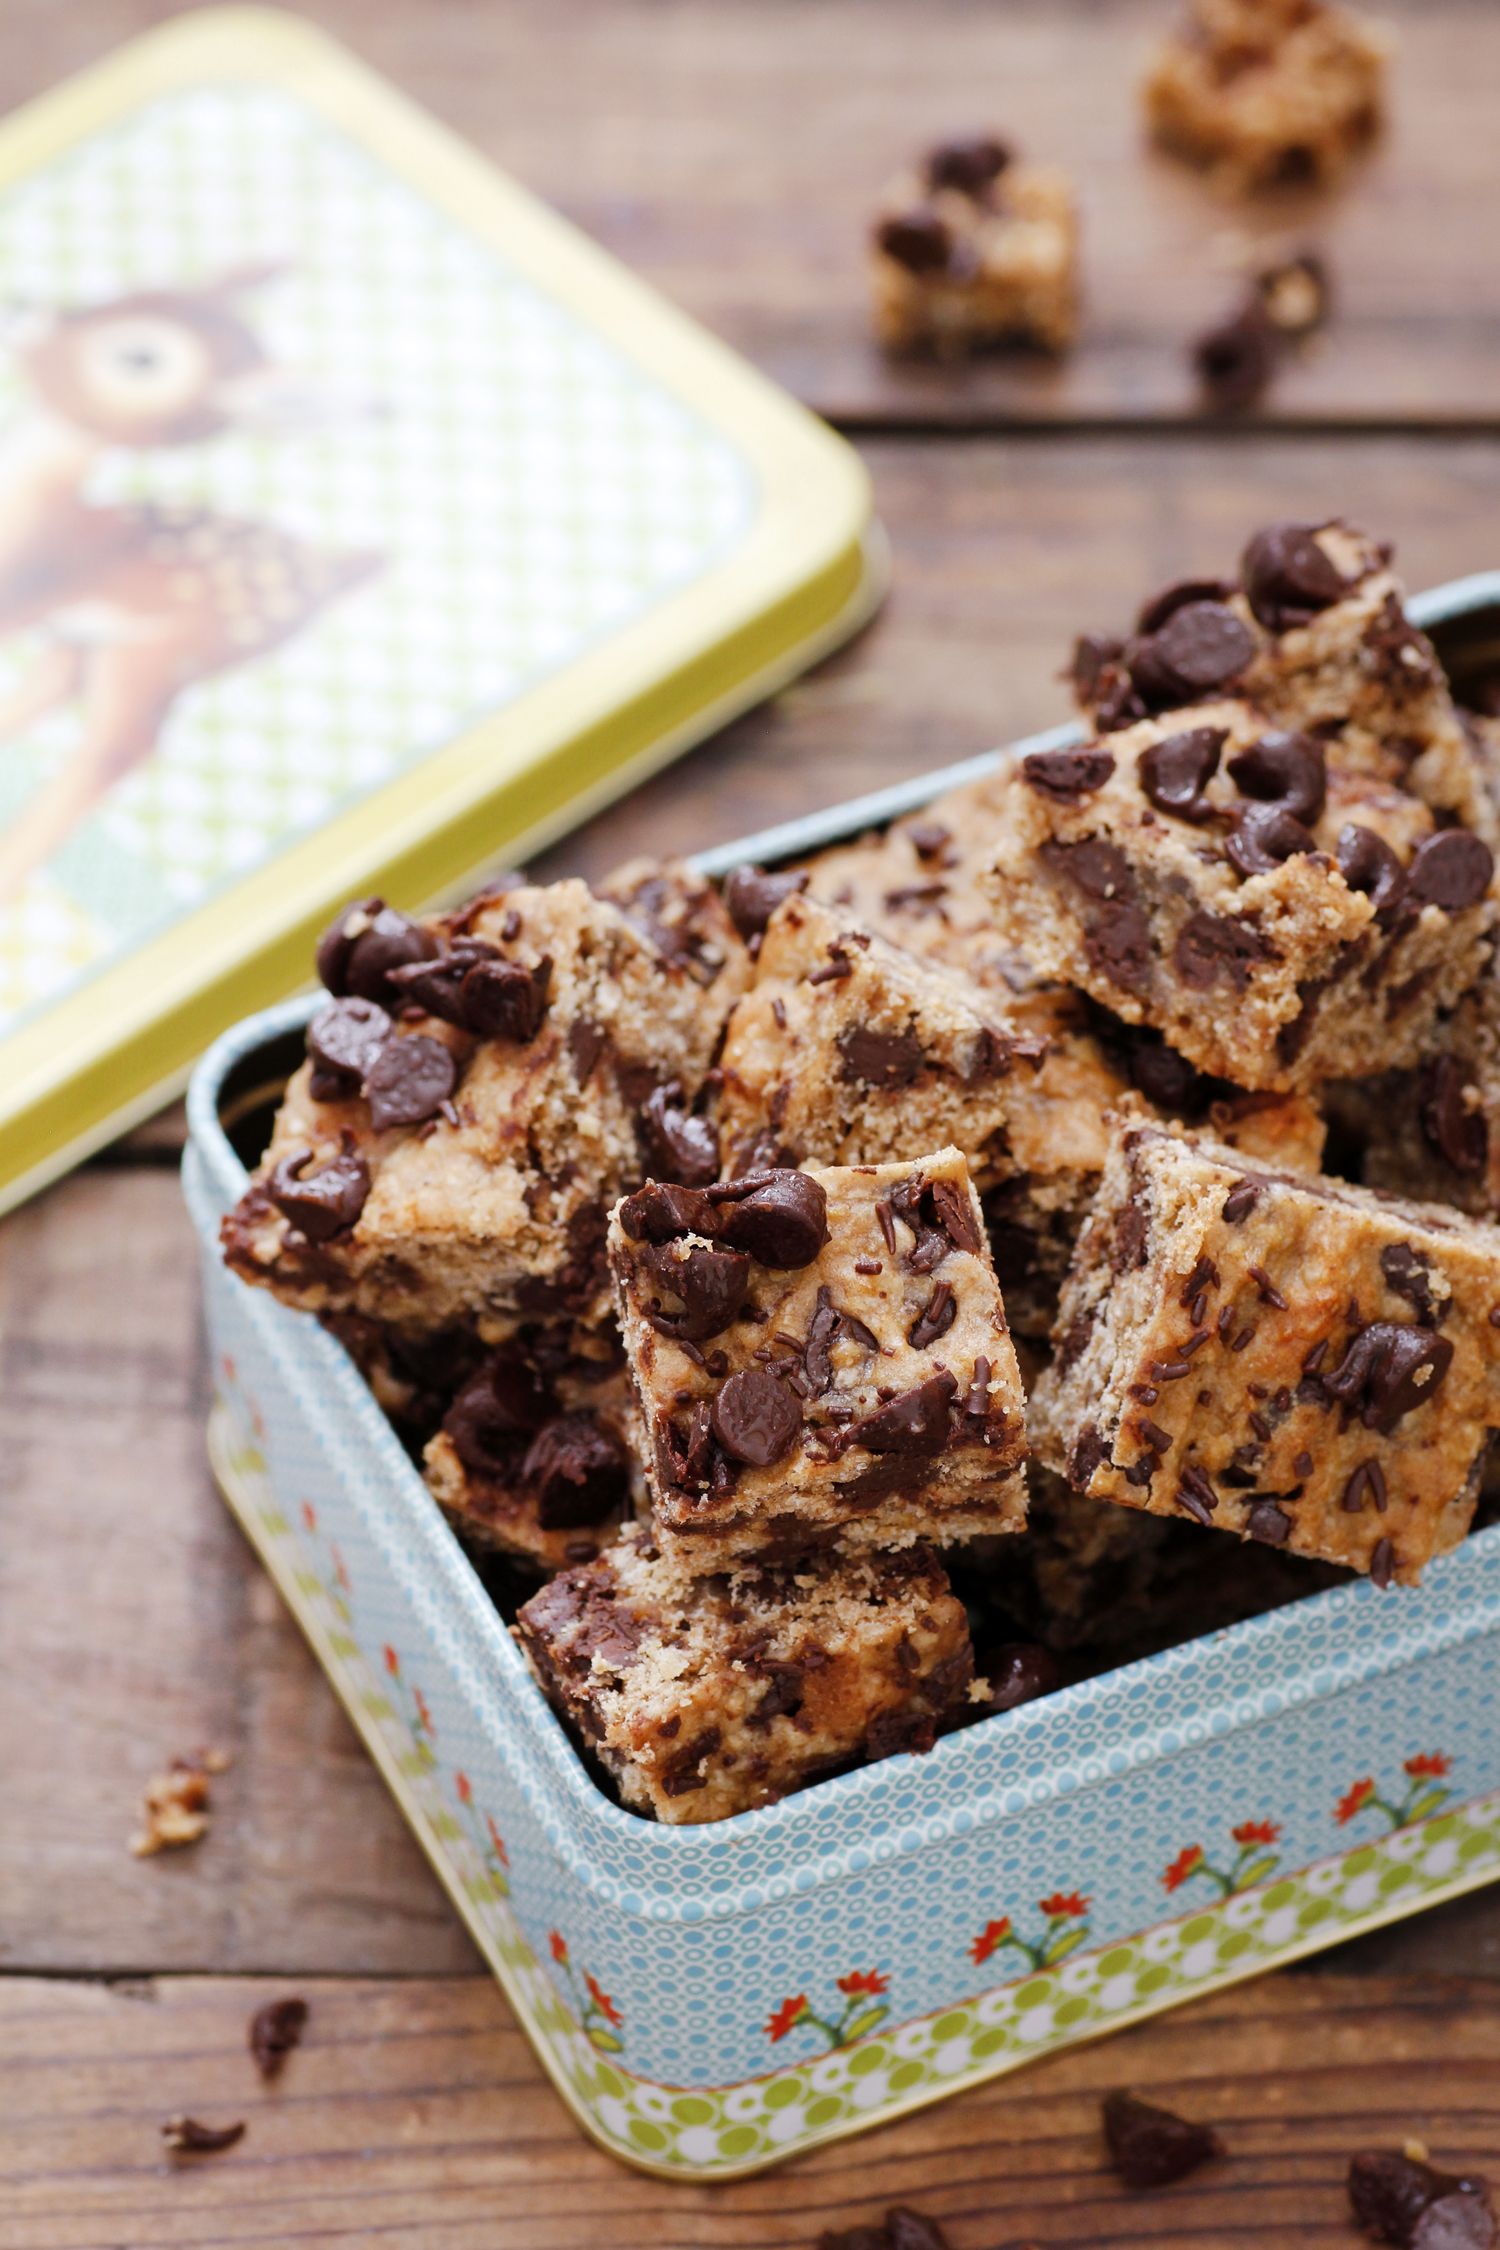 Chocolate Chip Banana Bars with Peanut Butter